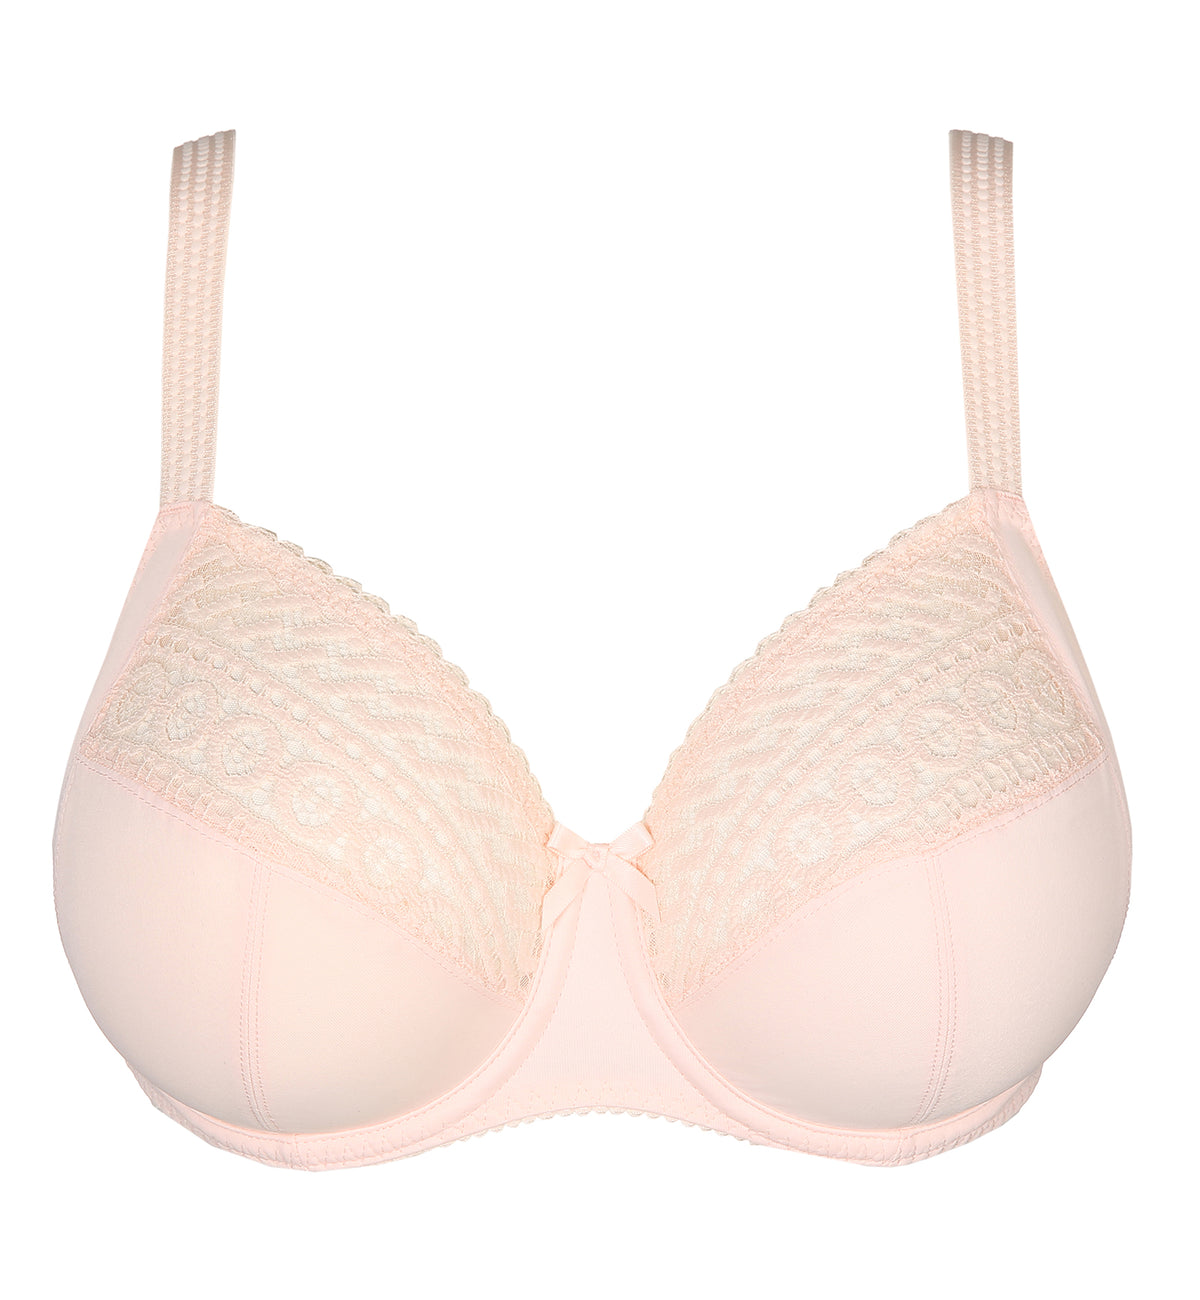 PrimaDonna Montara Full Cup Balcony Underwire Bra (0163380),32D,Crystal Pink - Crystal Pink,32D